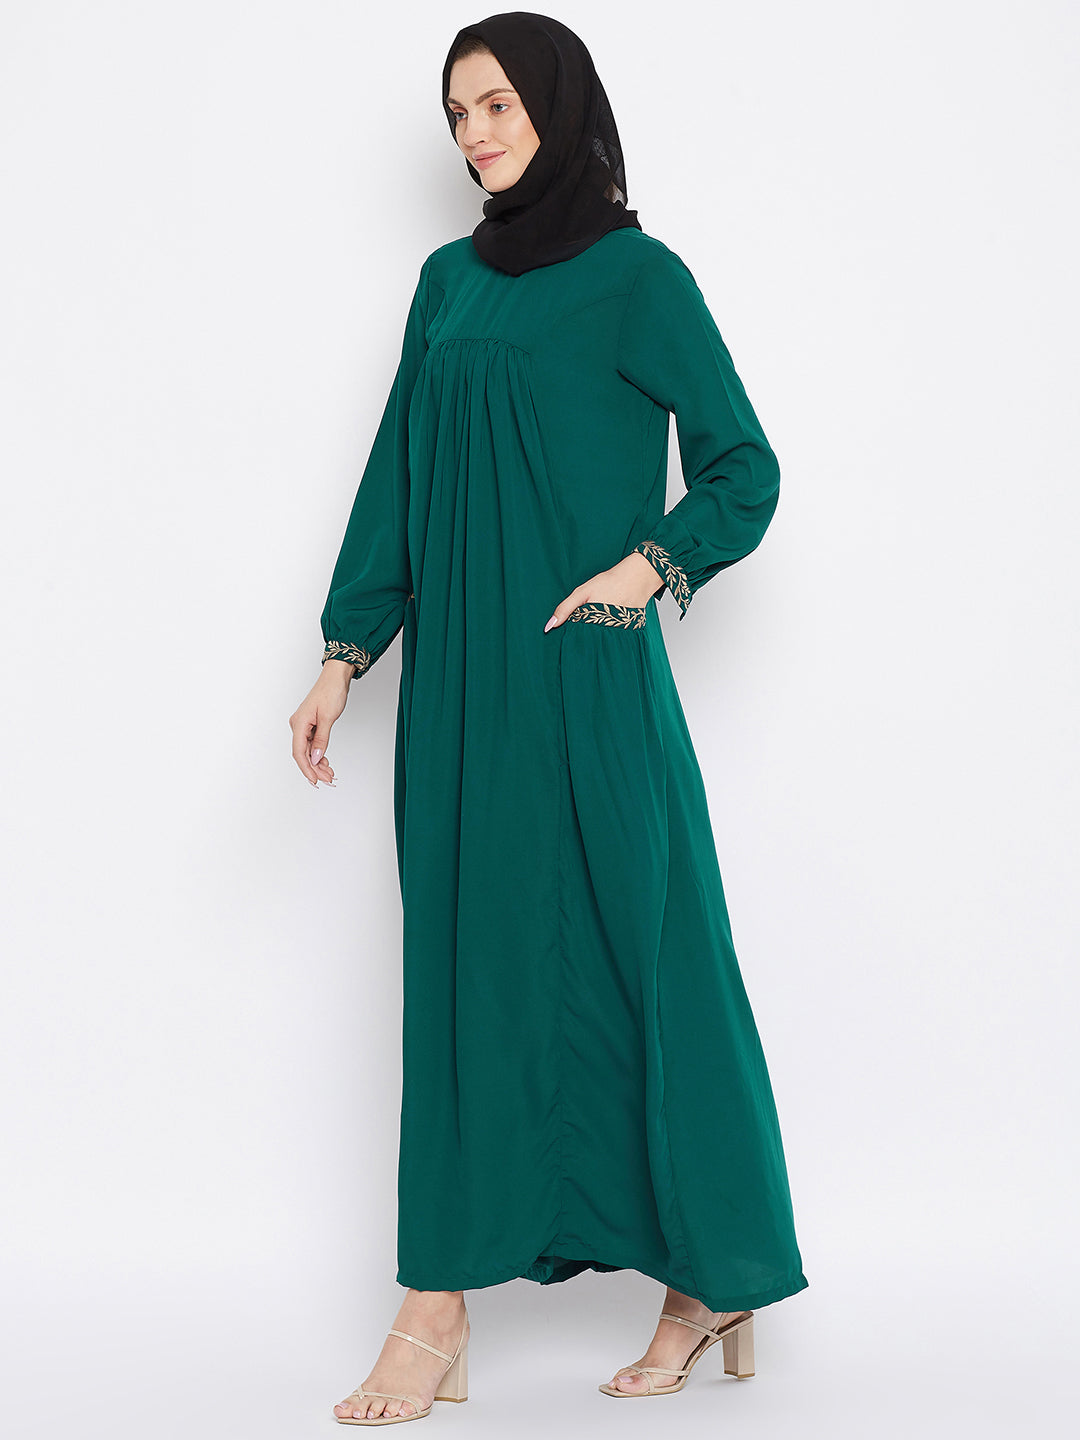 Nabia Women Bottle Green Pocket Embroidery Nida Matte Fabric Abaya with Georgette Scarf